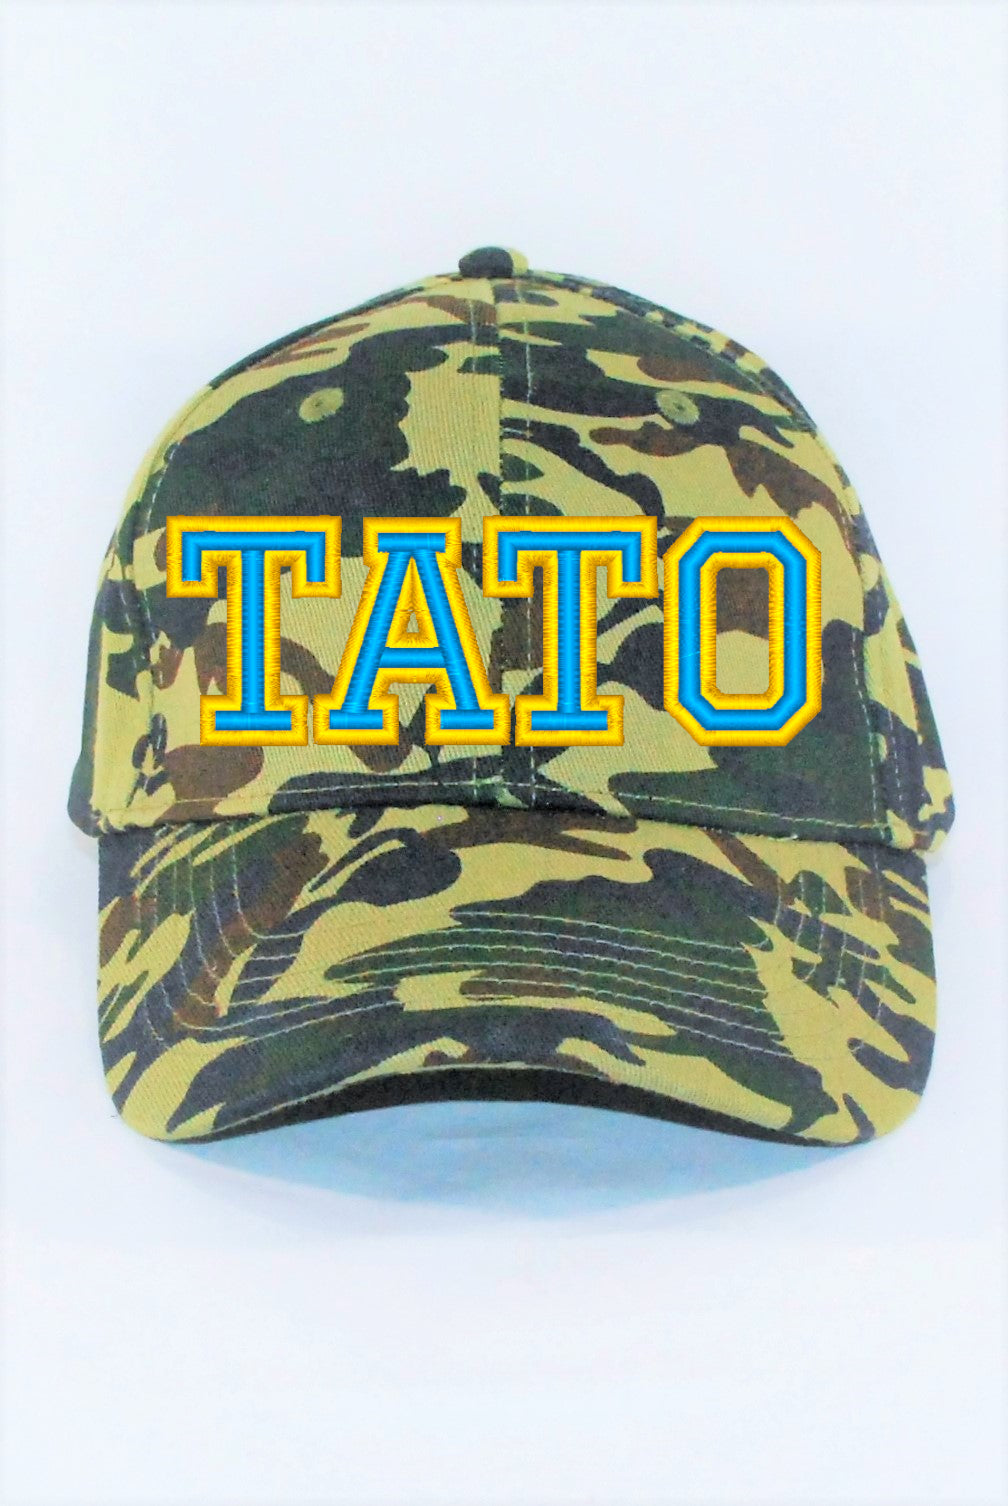 3D embroidered hat "TATO"